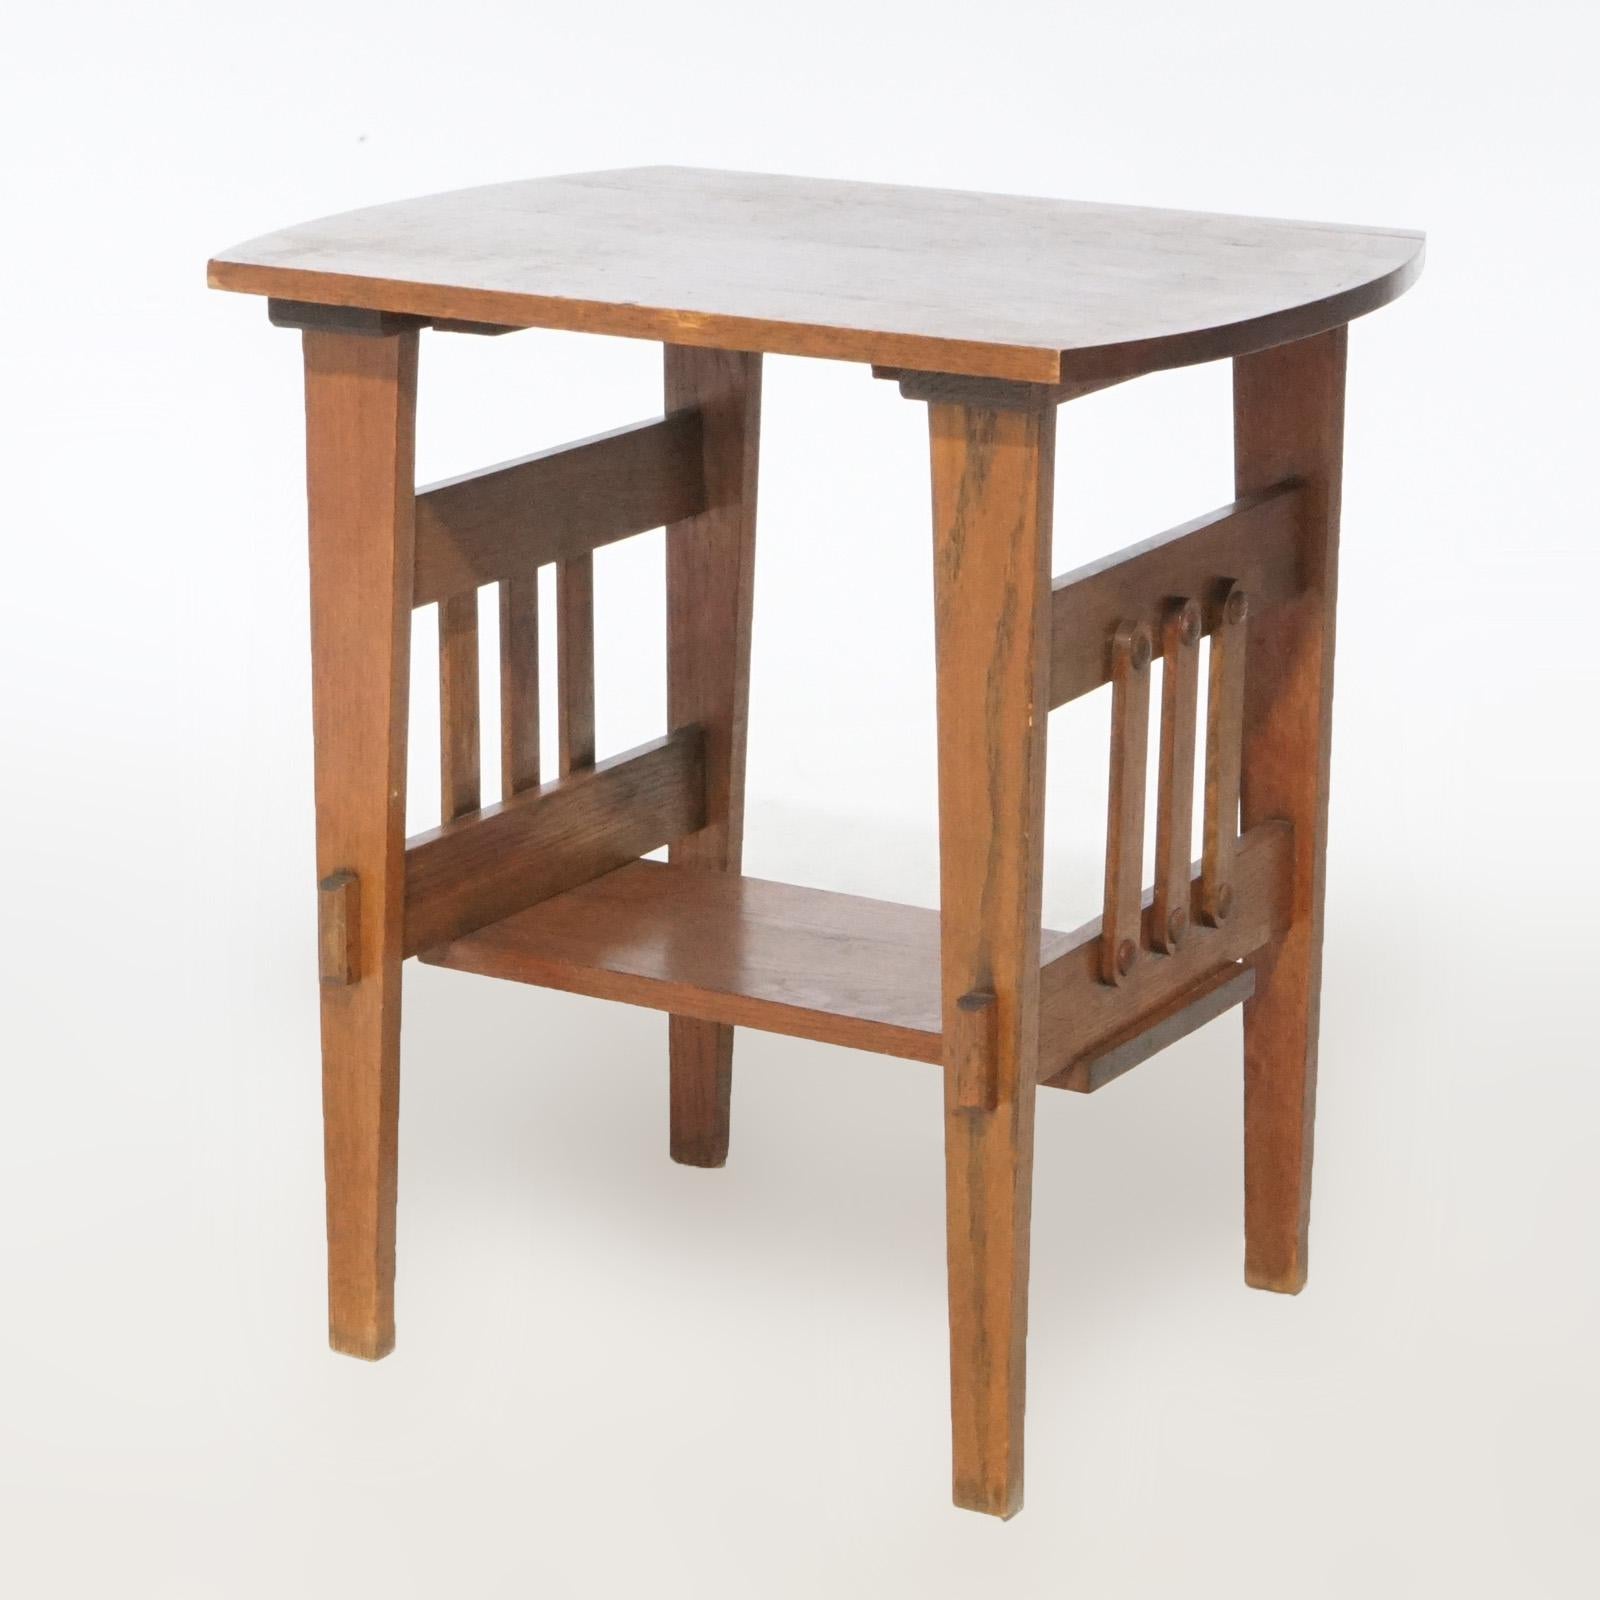 An antique Arts and Crafts Mission side table offers oak construction with spindle sides, circa 1910

Measures - 41.5